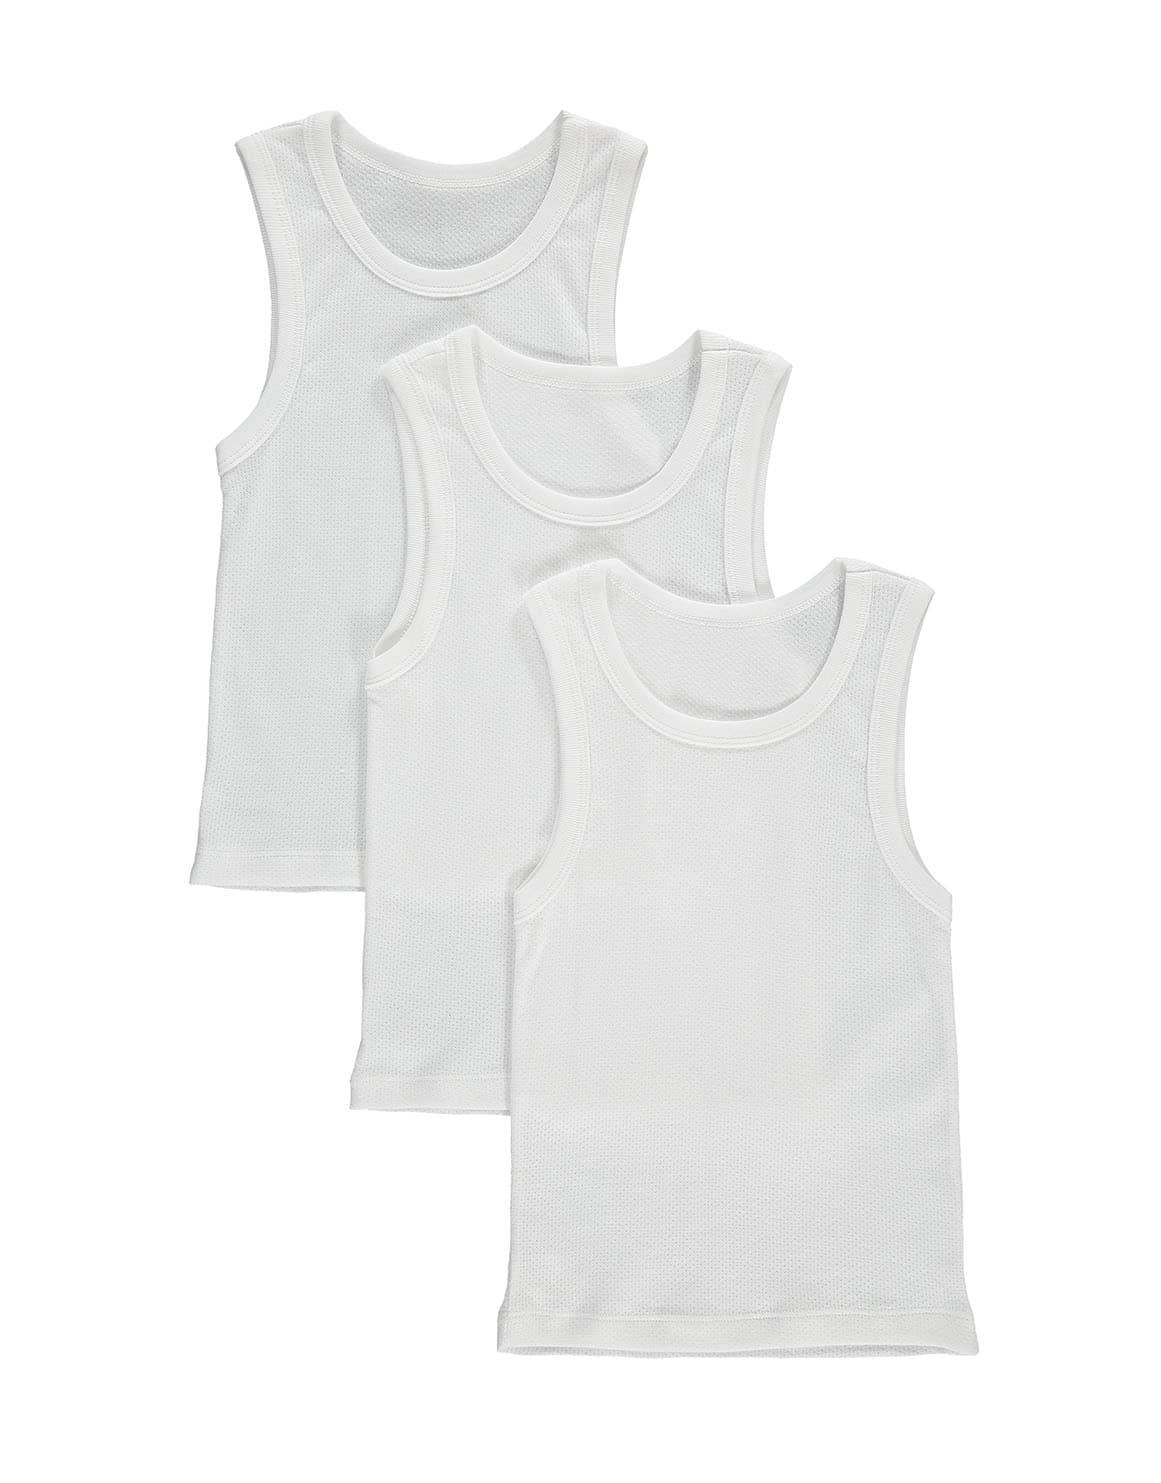 YB 3PK CELL VEST CS - Woolworths Mauritius Online